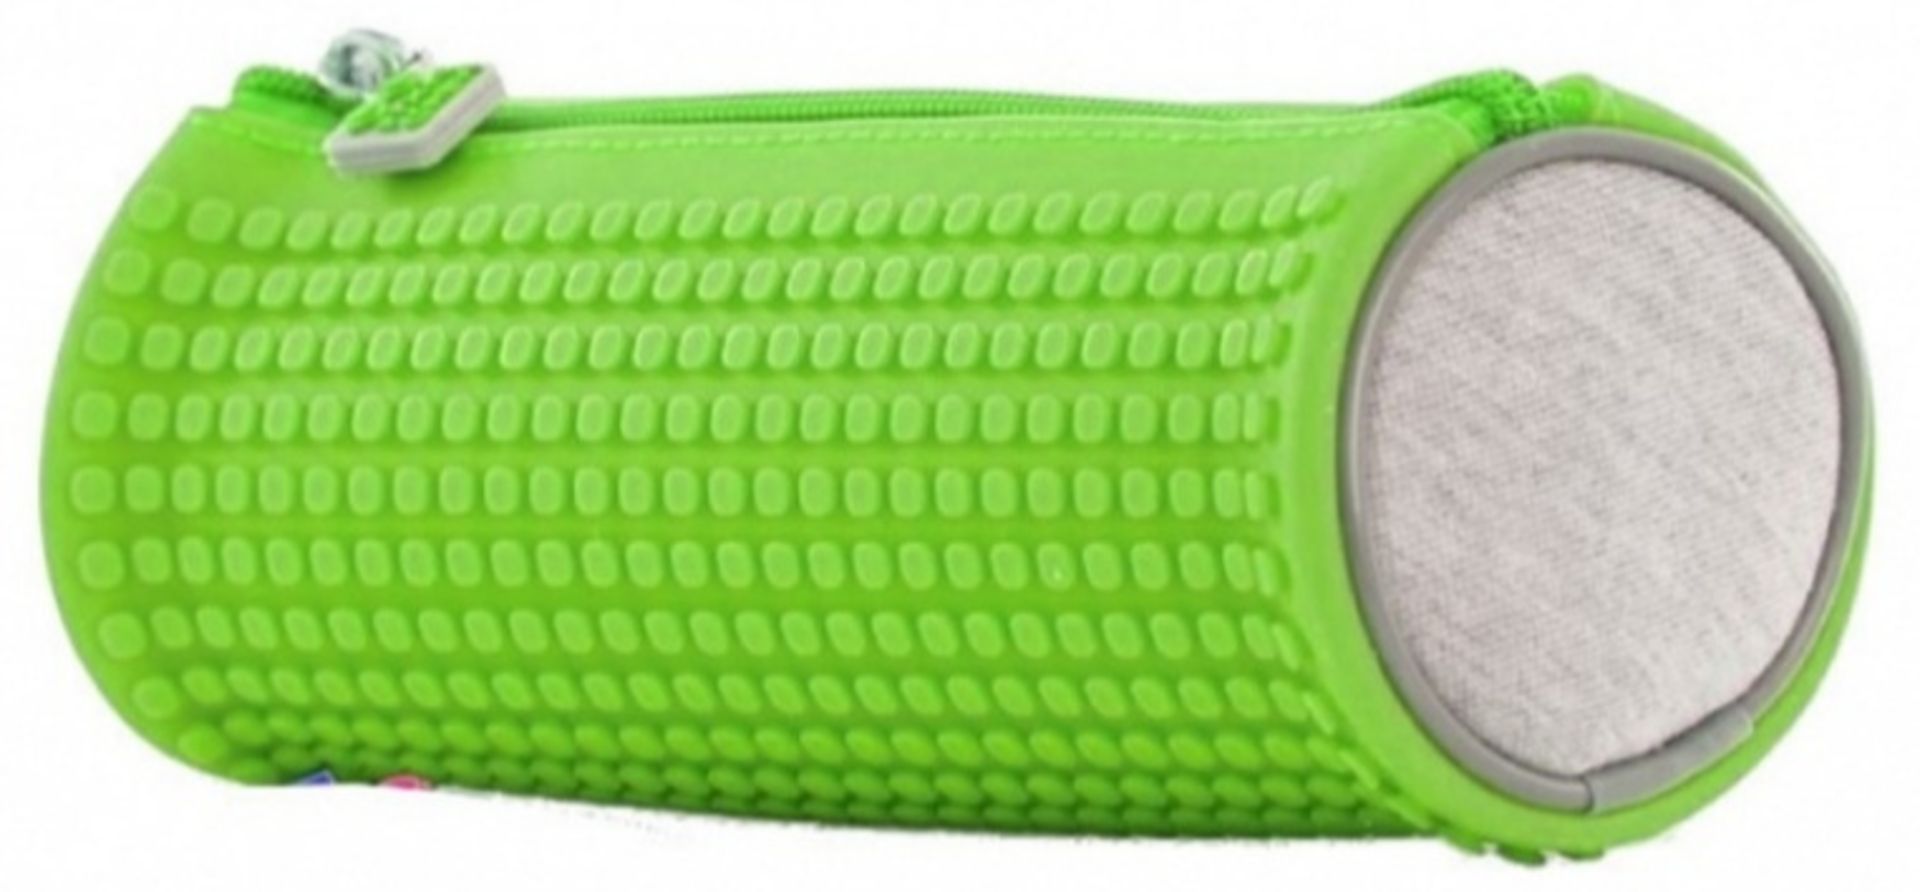 X 2 BRAND NEW PIXEL CREW CREATIVE ROUNDED PENCIL CASE - GREEN. TOTAL RRP £24.90